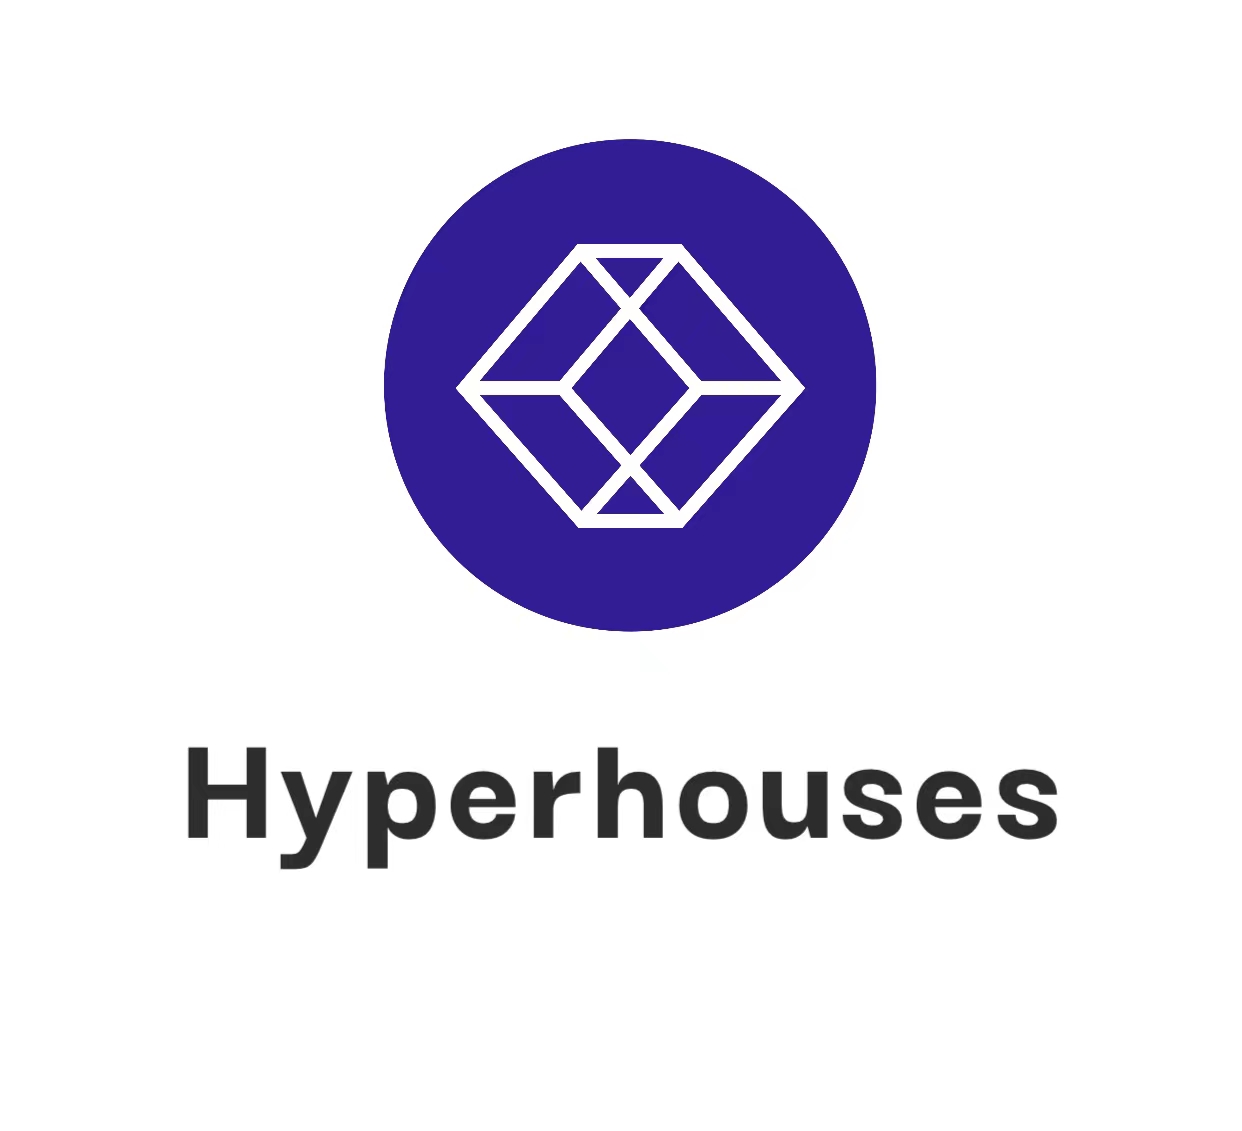 HYPER HOUSES Official USA Website| Shop The Latest Collections Featuring Handbags, Ready-To-Wear, Shoes, And Fragrances. Uncompromised Quality And Craftsmanship Since 2016. Trendy, Cute, Affordable – Shop Handbags .